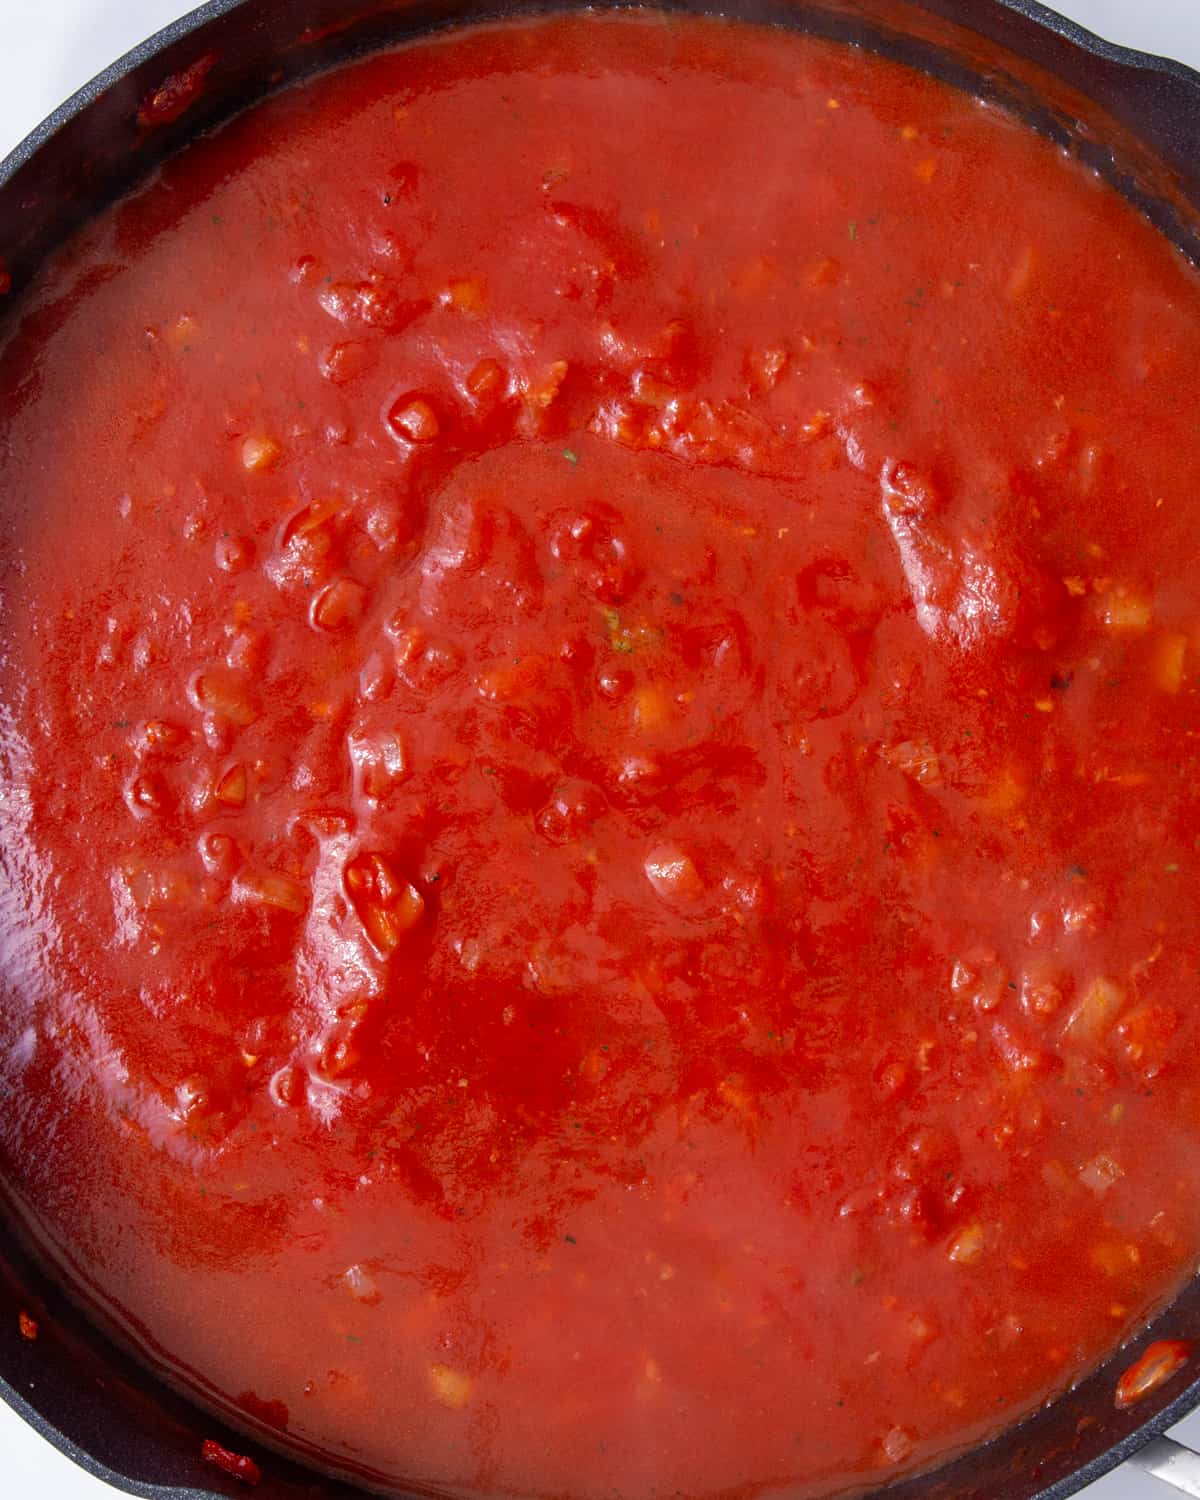 Chopped tomatoes in a pan.